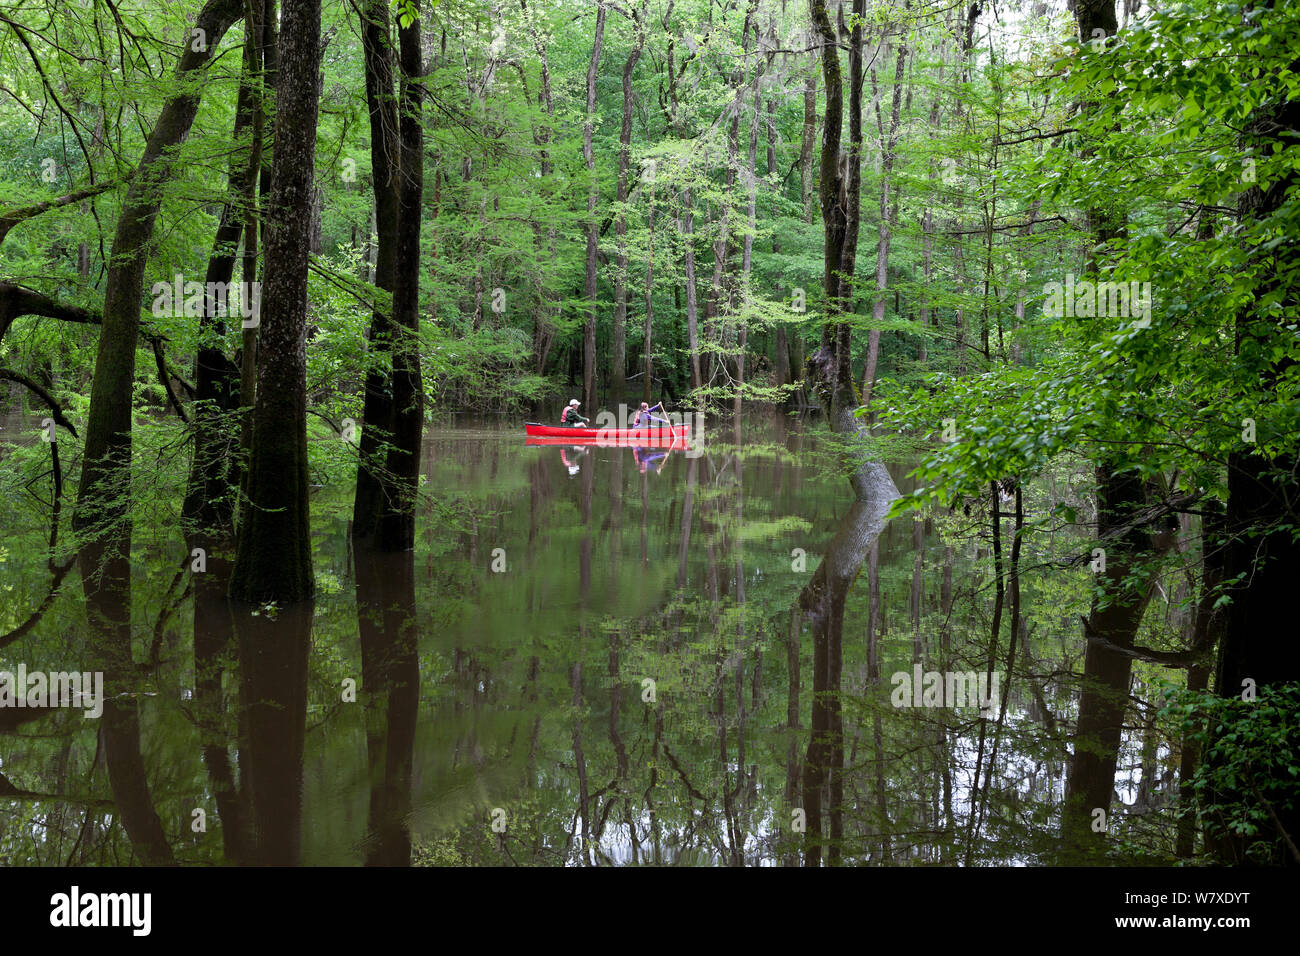 Two people canoeing in the distance in Congaree National Park near Wise Lake, South Carolina, USA.  Model Released. Stock Photo